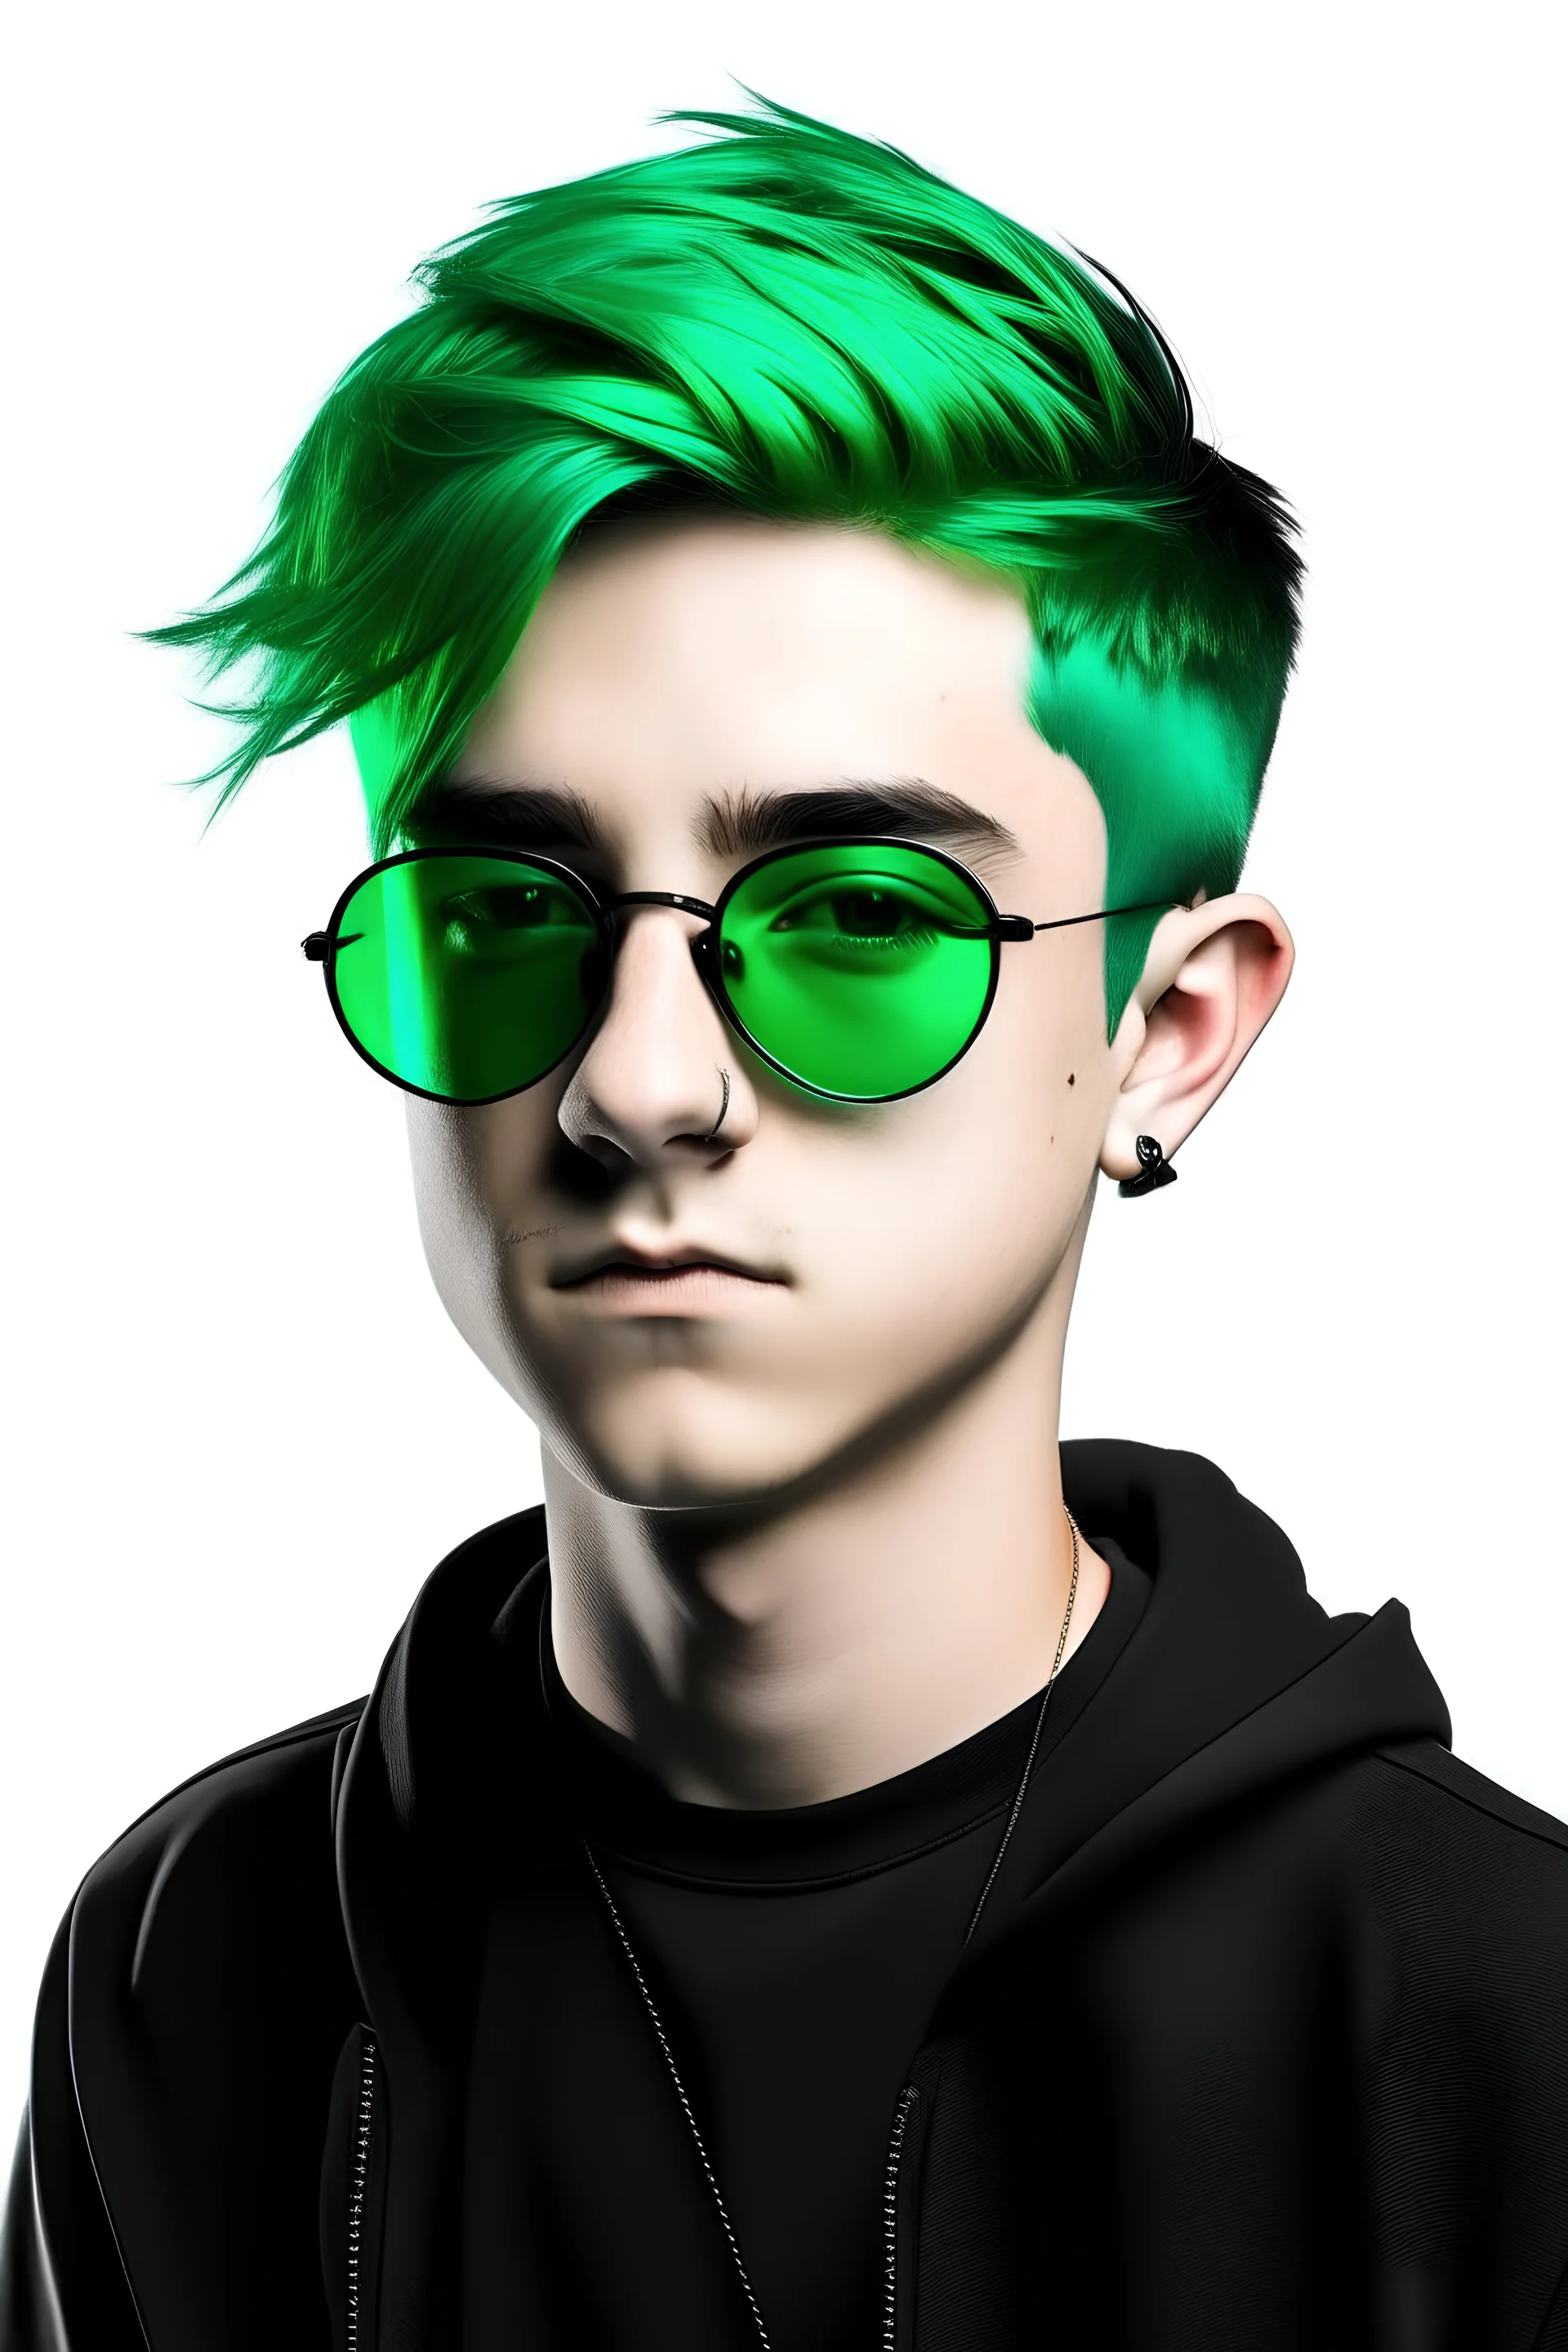 A boy with green hair and green eyes, wearing black clothes and sunglasses, and a white background